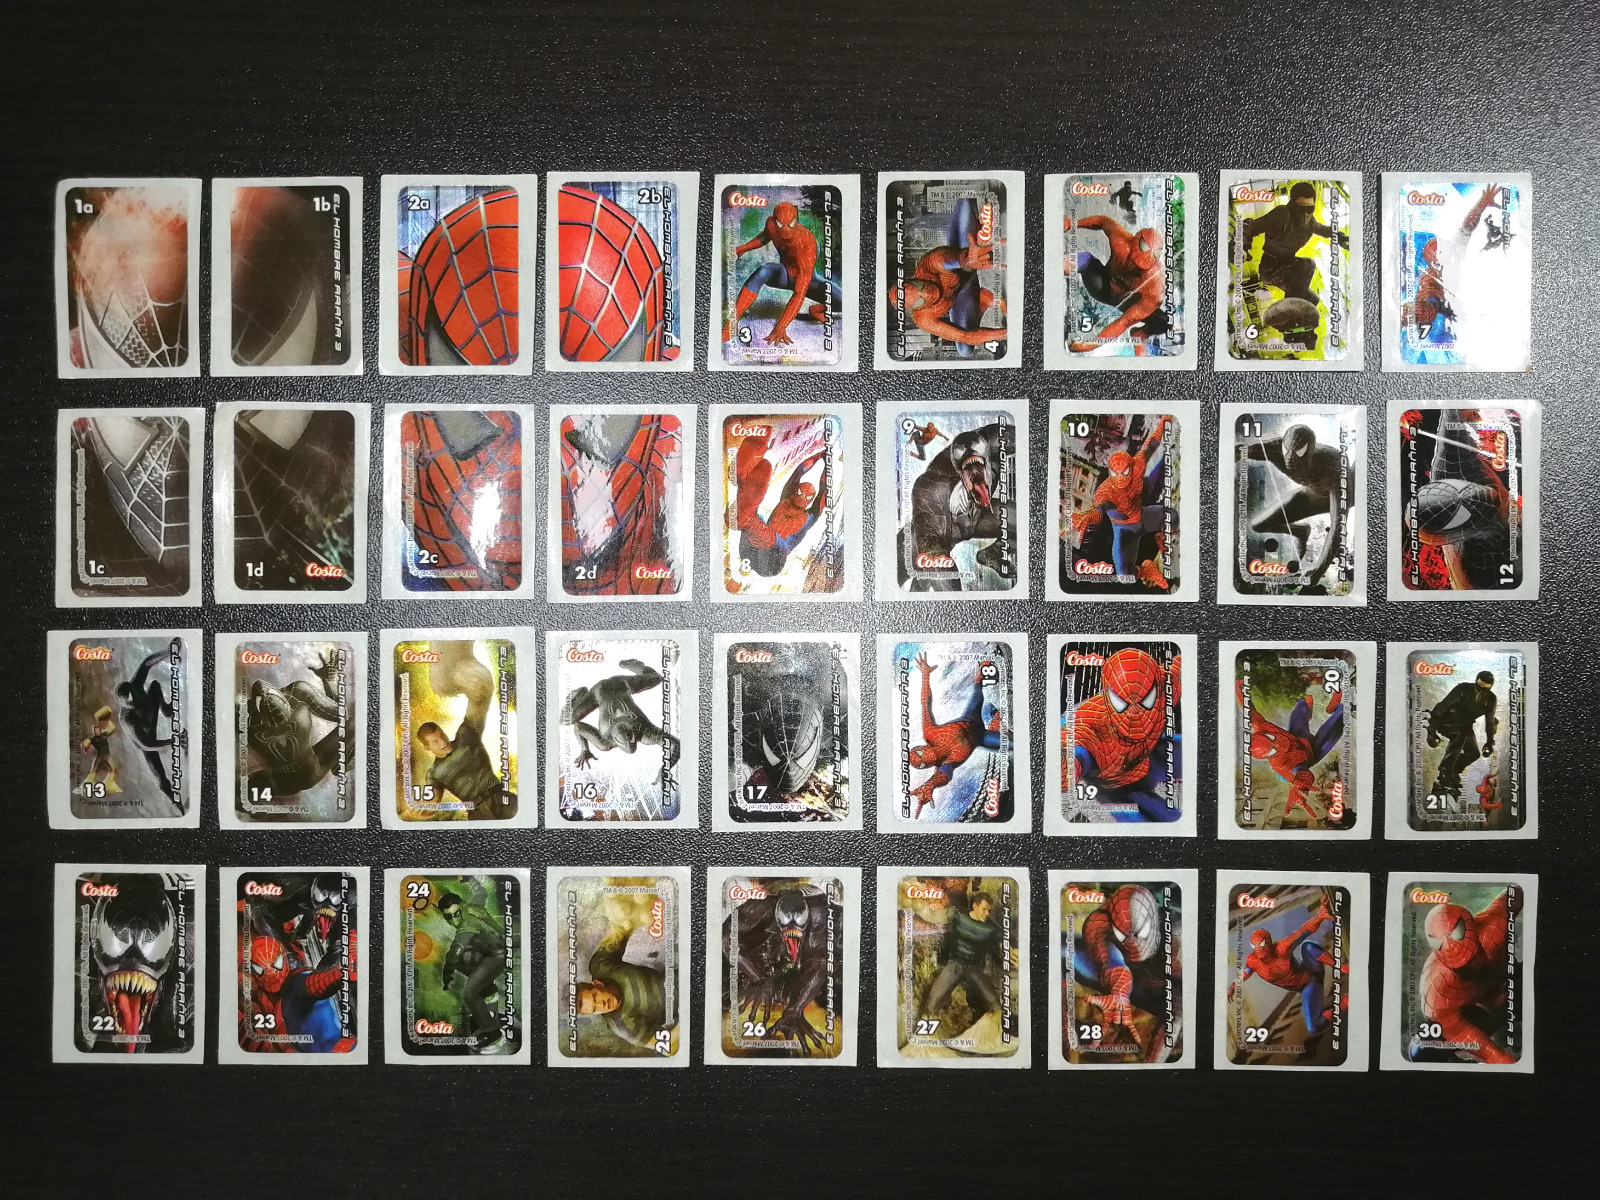 Spiderman 3 Movie Promotional Holographic Stickers 36/36 FULL SET Peru, 2007